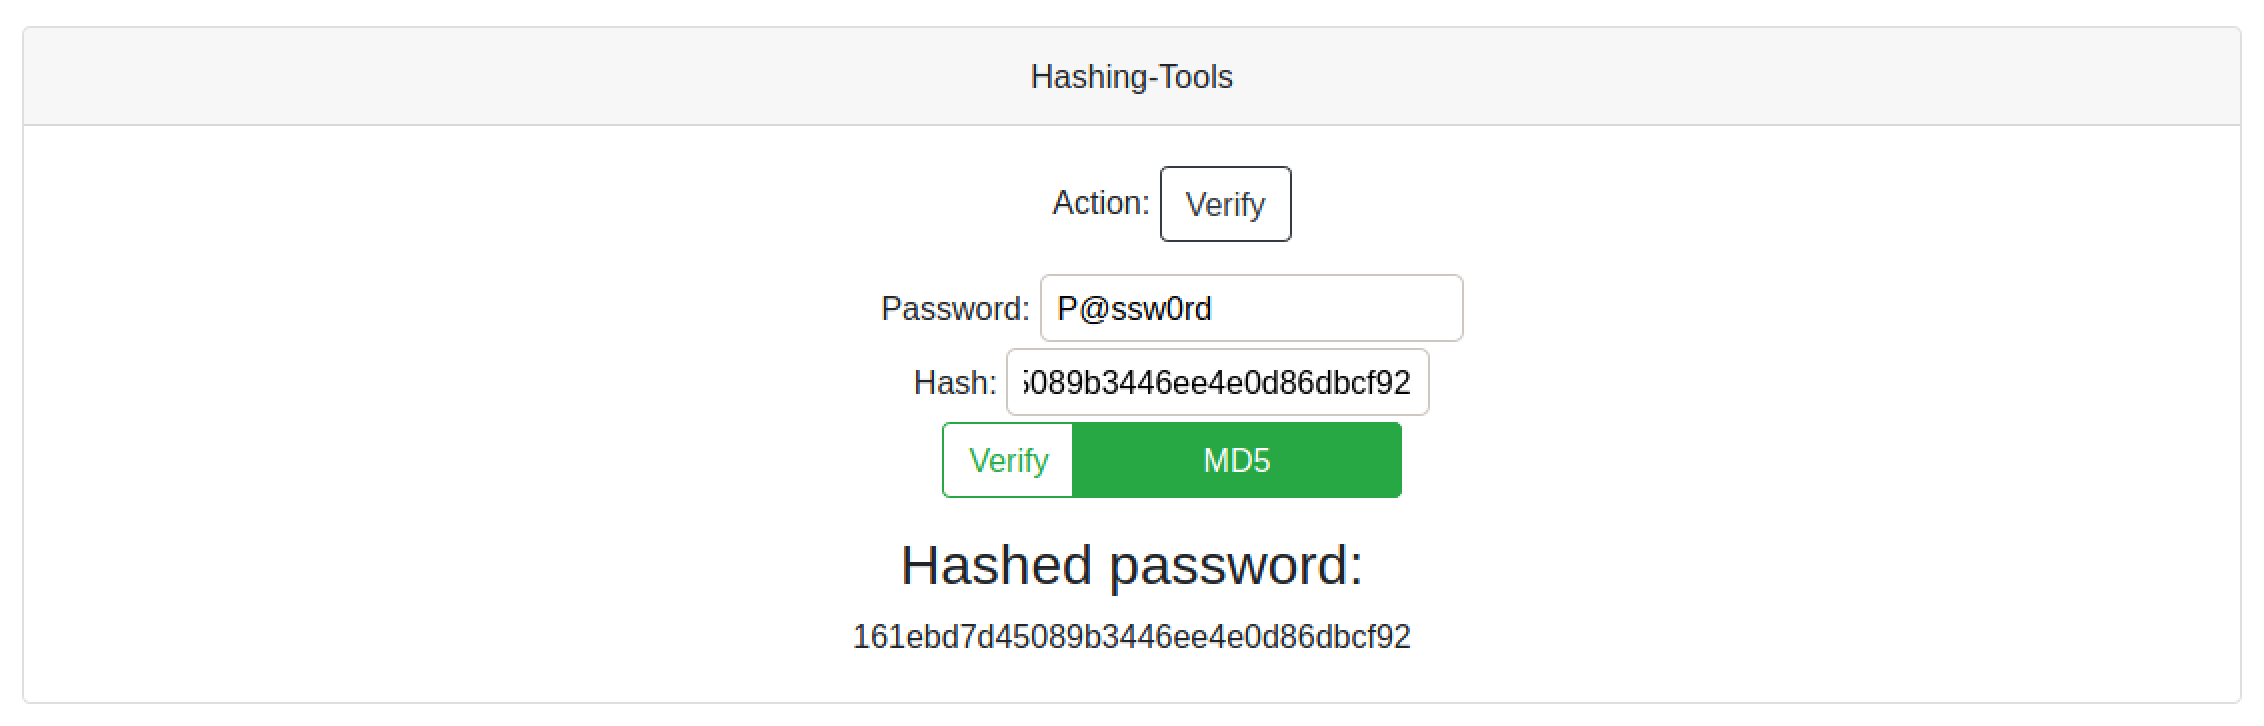 Entering a password and hash.